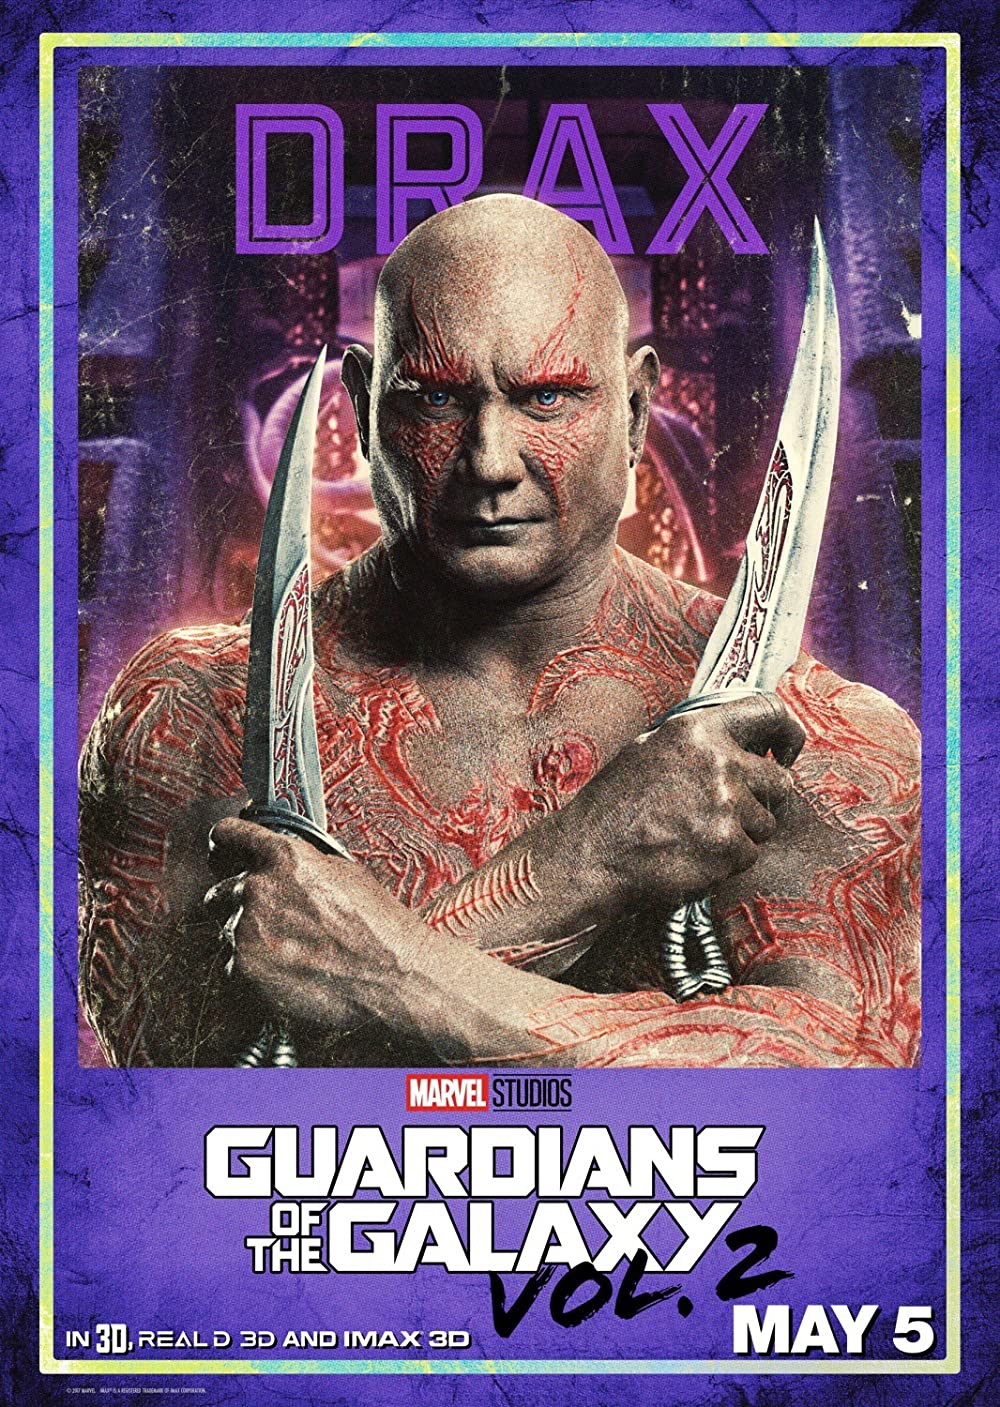 Favorite 'Guardians of the Galaxy Vol.2' Character Poster?